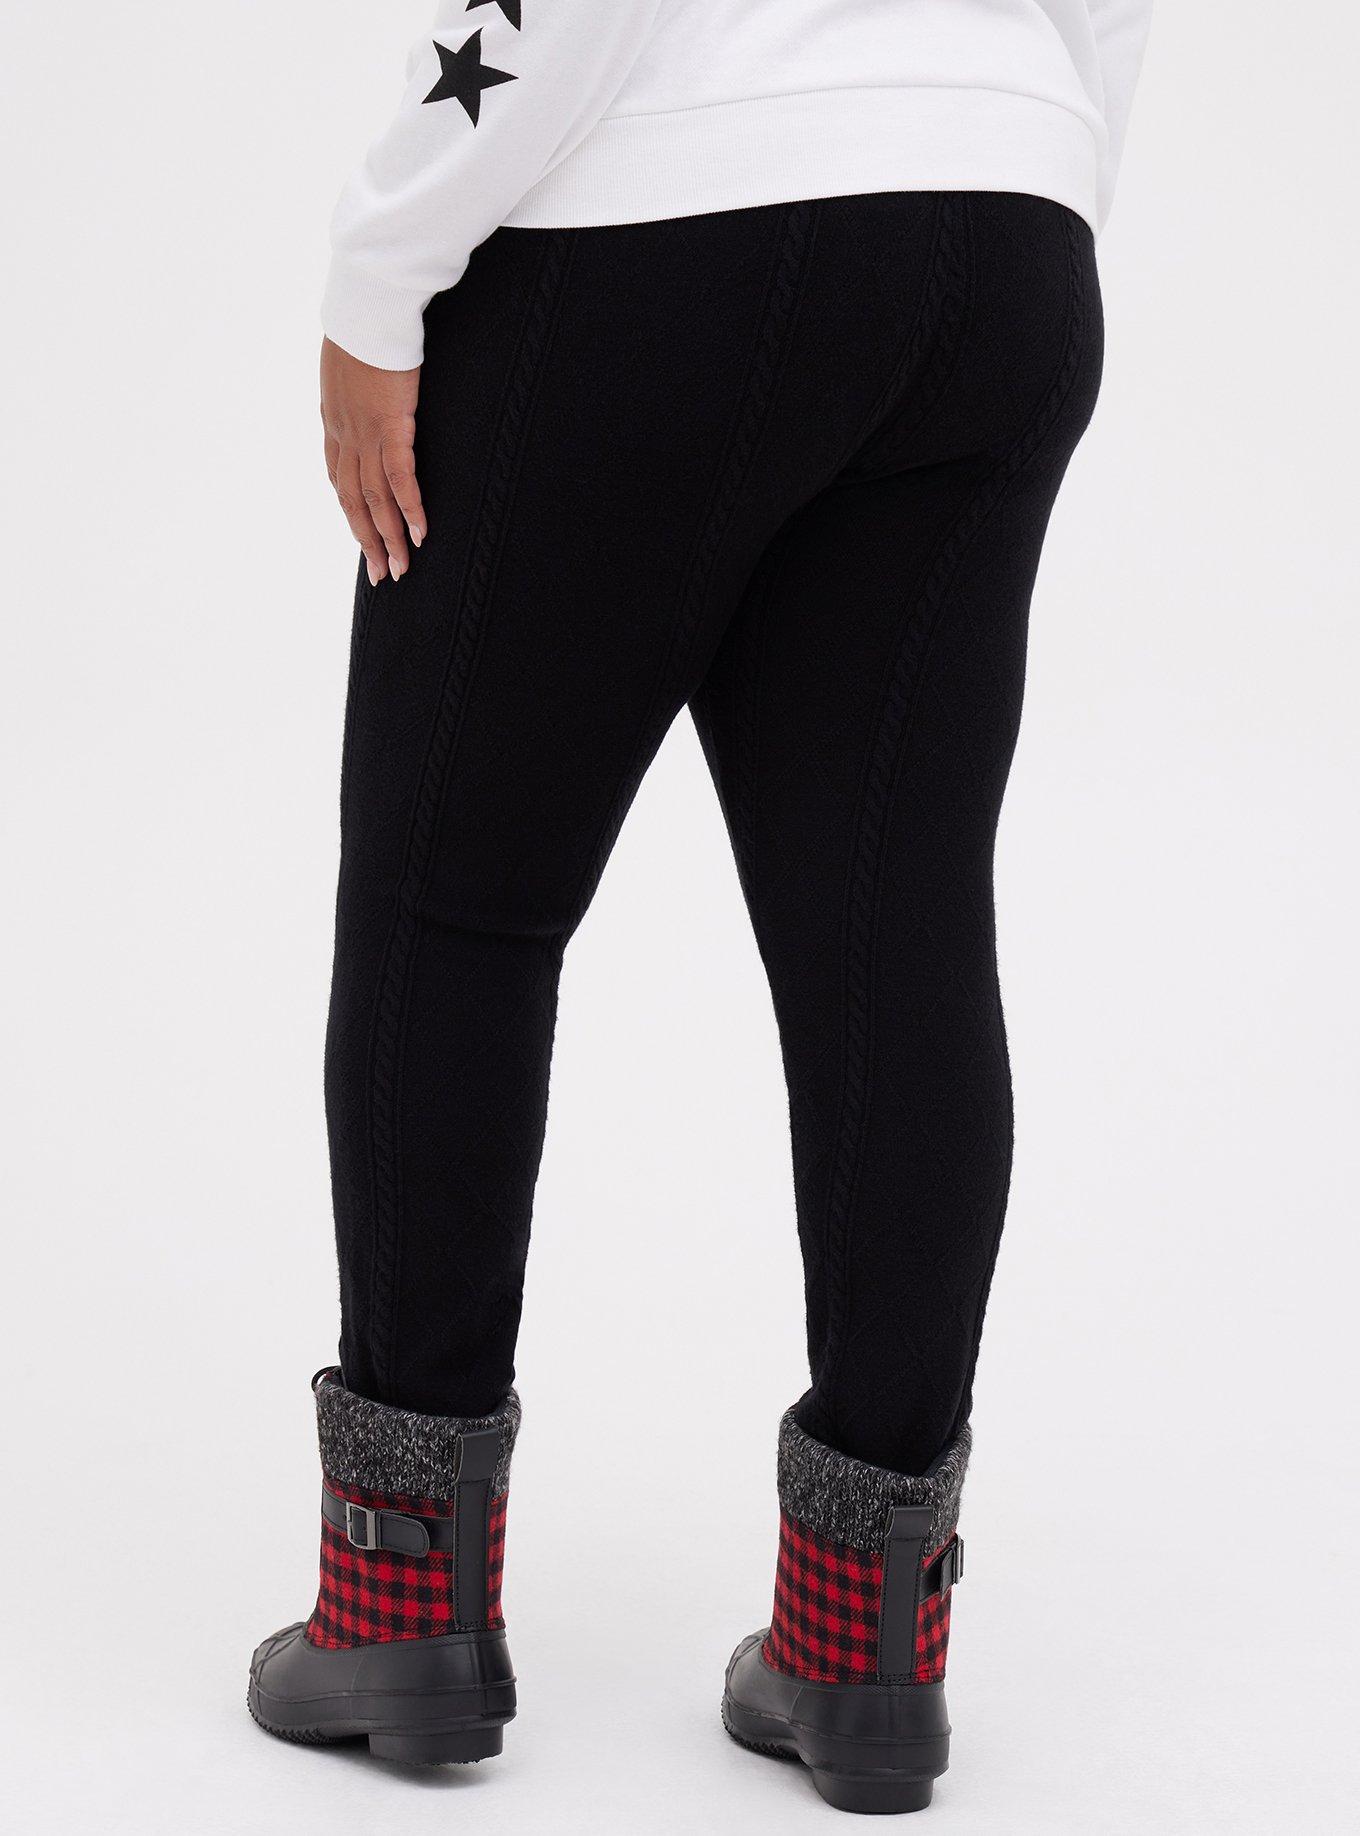 Faux Fur Insert Cable Knit Top And Snowflake Print Leggings Plus Size Outfit  [57% OFF]